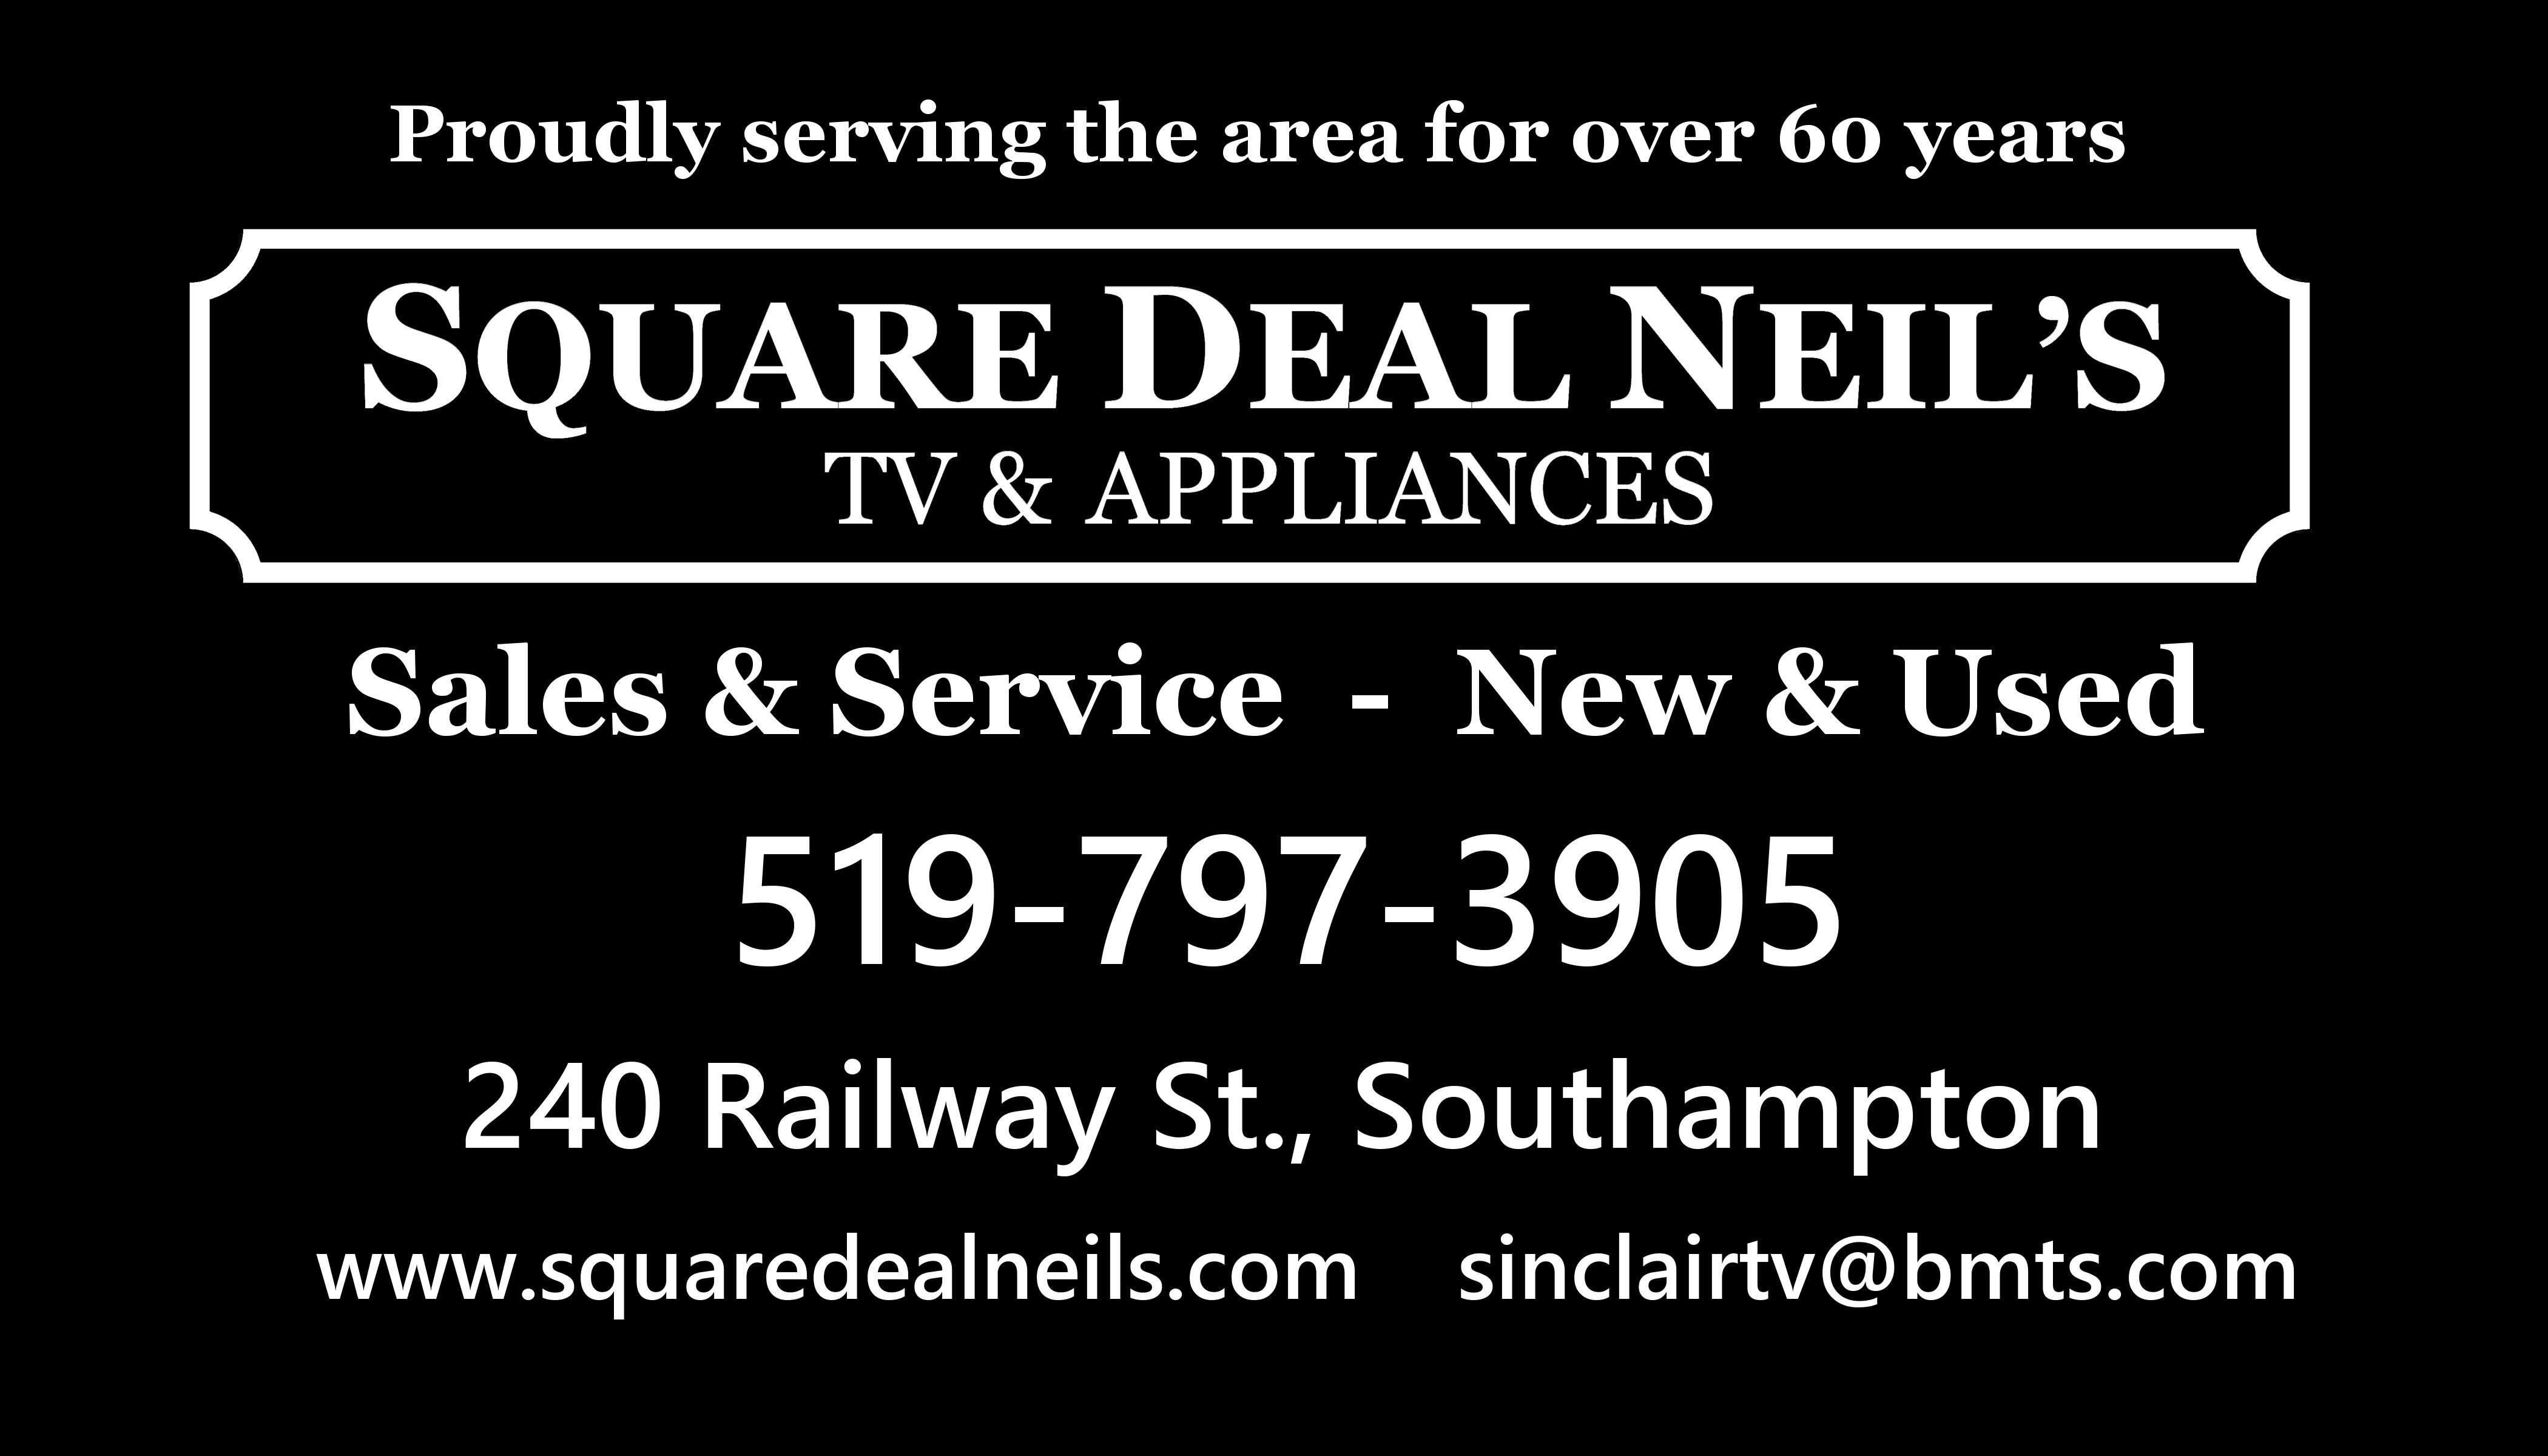 Square Deal Neil's